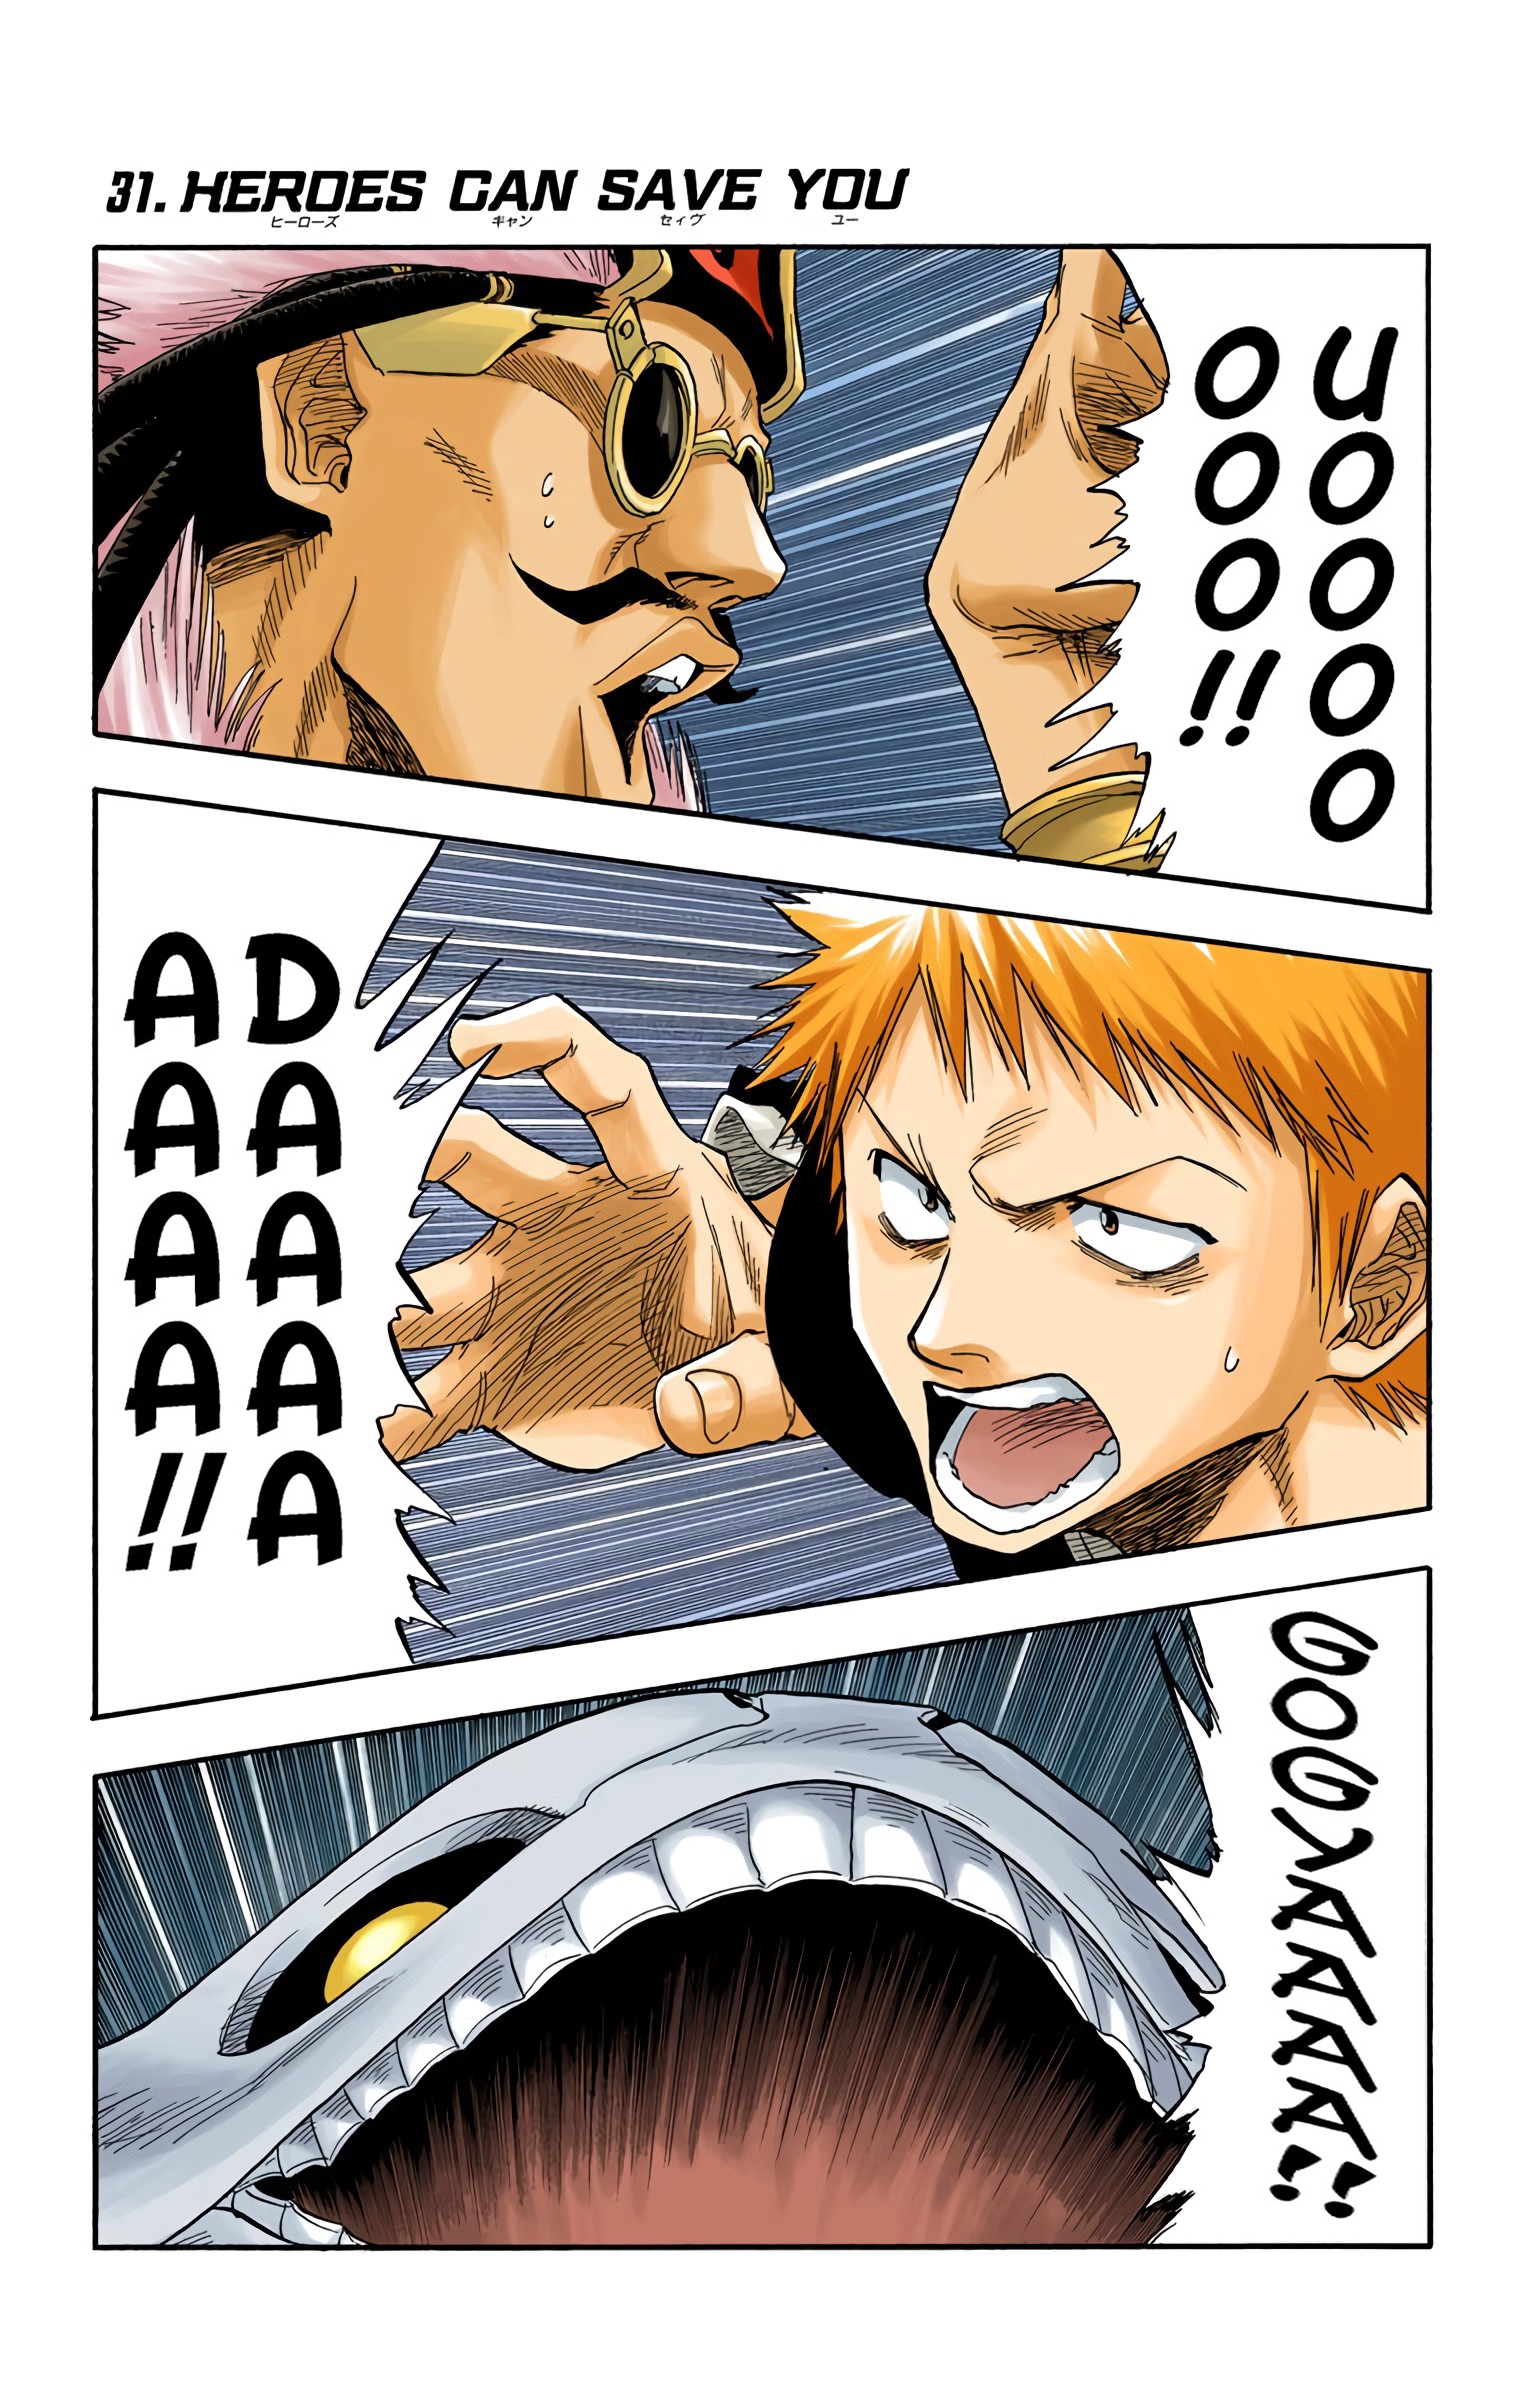 Bleach - Digital Colored Comics Vol.4 Chapter 31: Heroes Can Save You - Picture 1